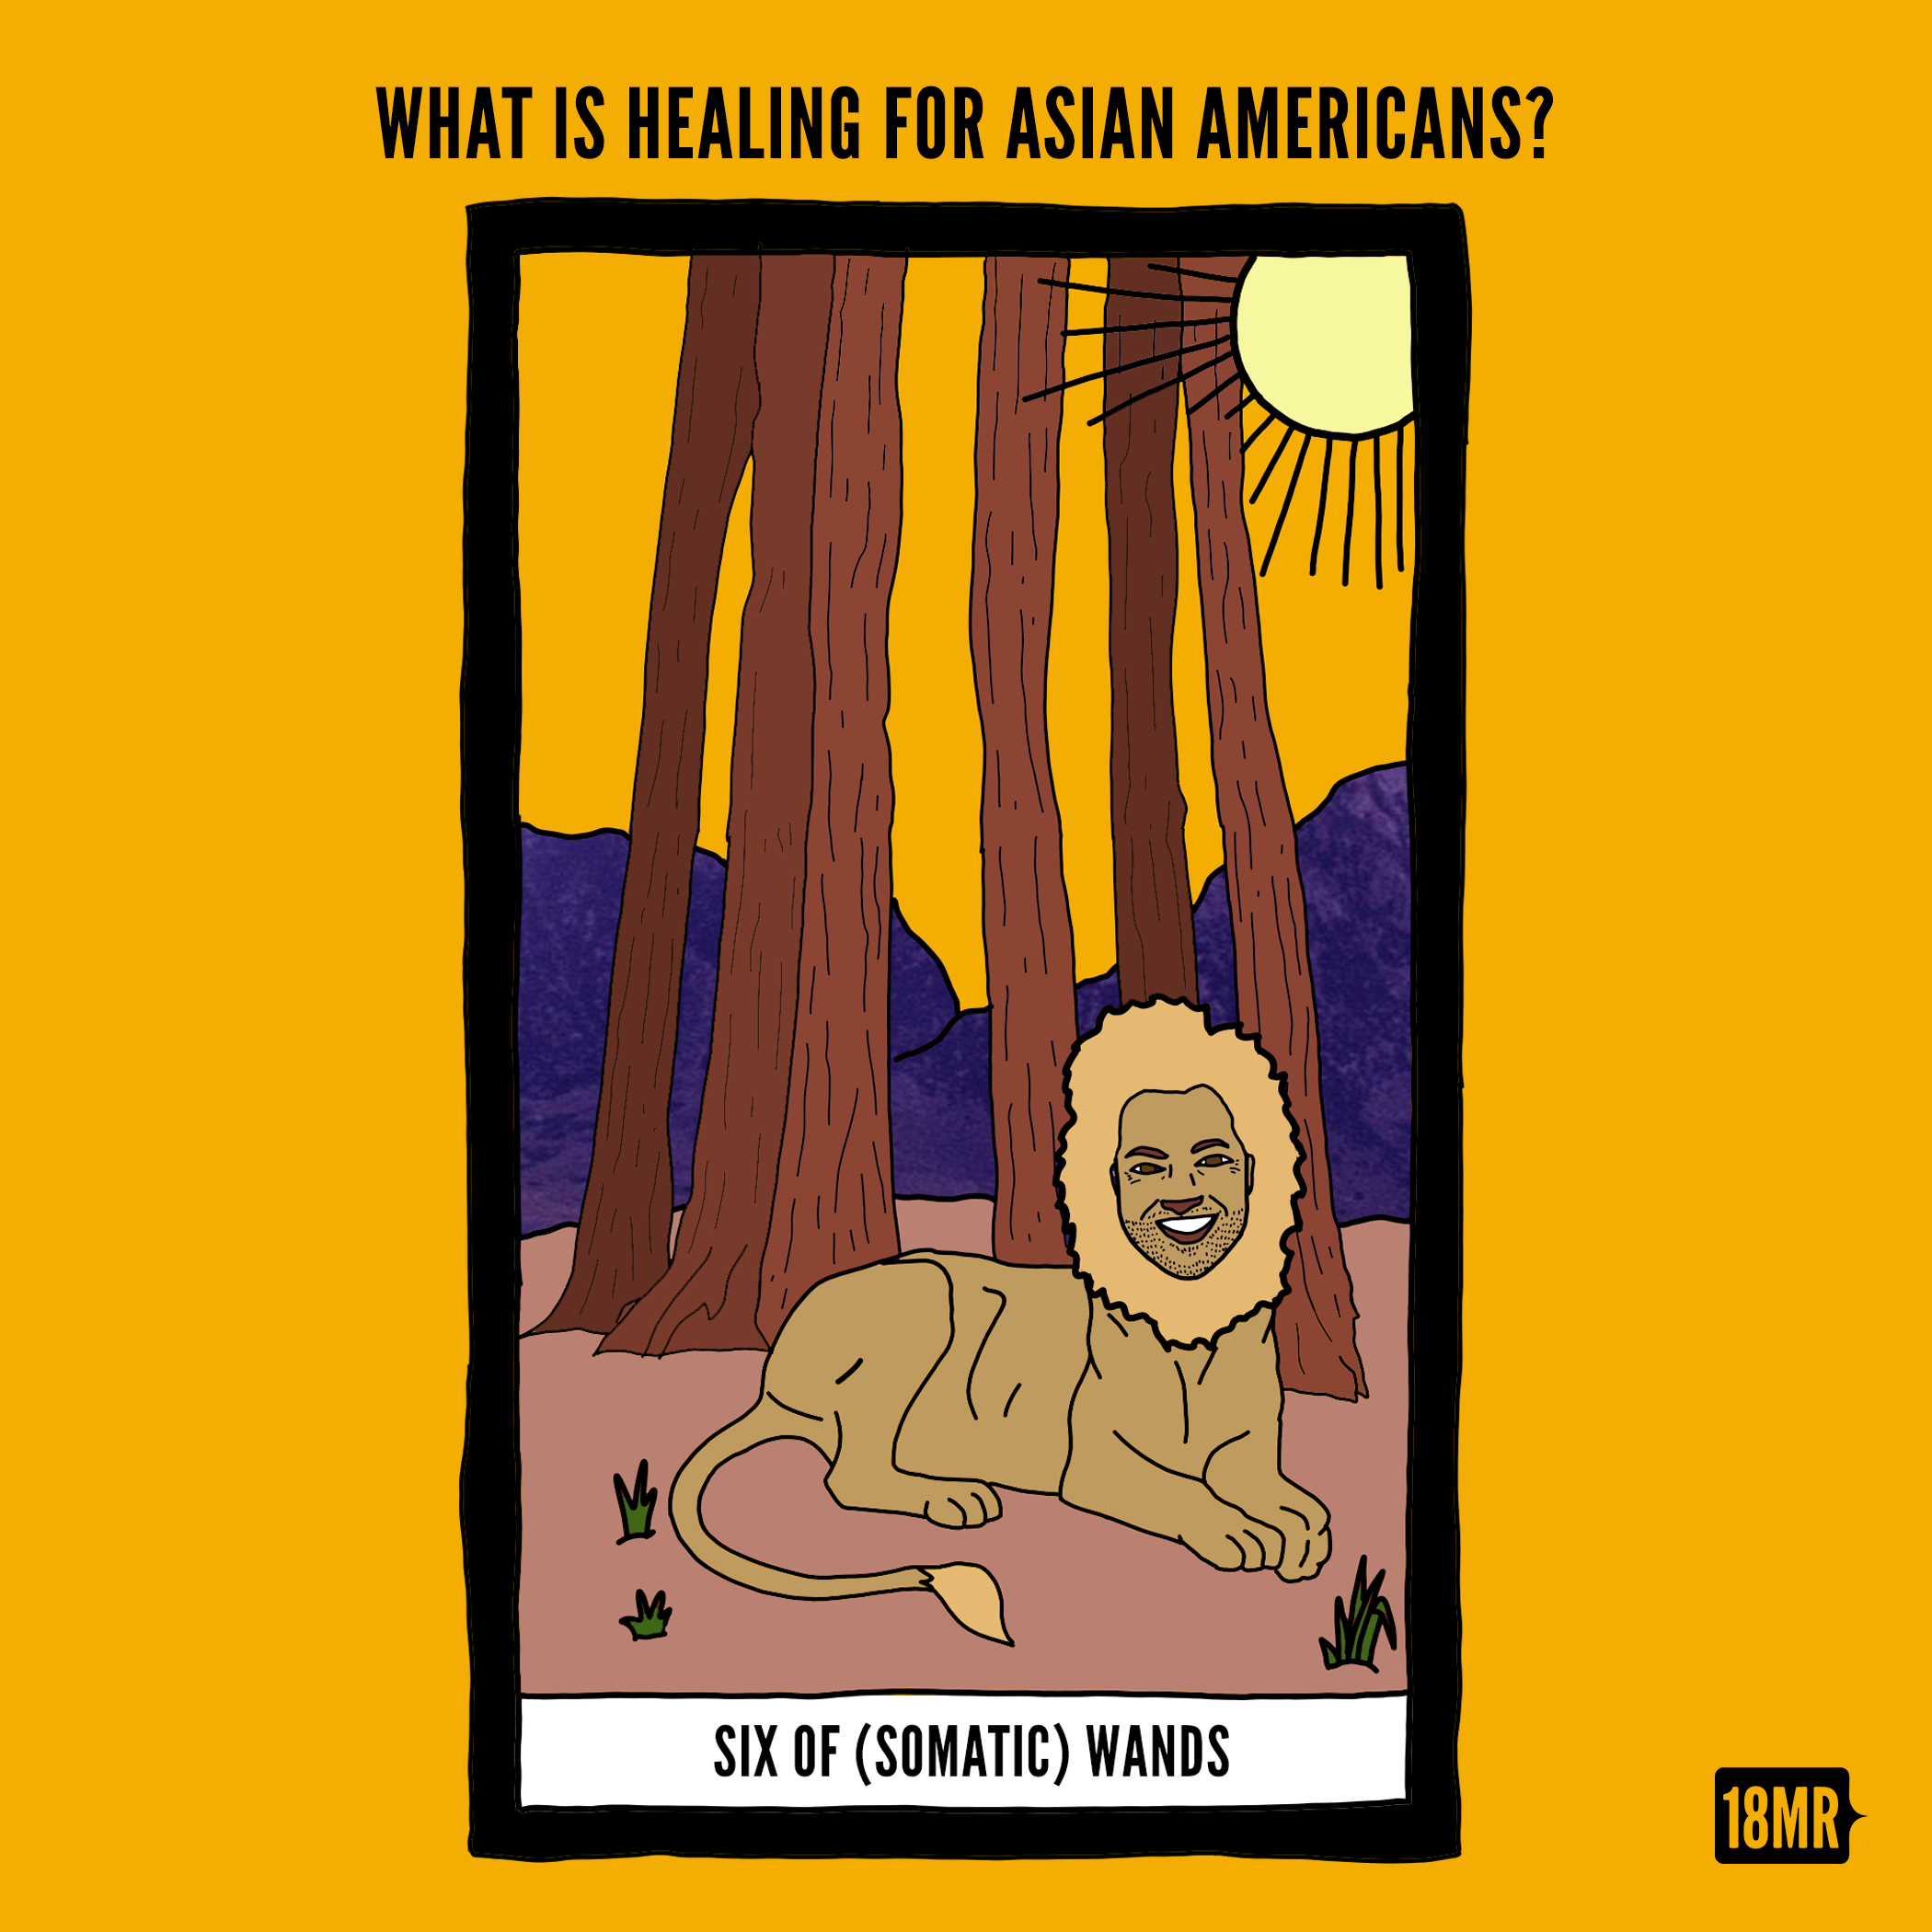 A tarot card graphic featuring a trans masculine South Asian person’s face with the body of a lion, laying on the ground. Behind them are six Redwood trees, mountains, and a bright yellow sun. Bold text at the bottom reads, “THE SIX OF (SOMATIC) WANDS.” Above the card, bold text reads, “WHAT IS HEALING FOR ASIAN AMERICANS?”